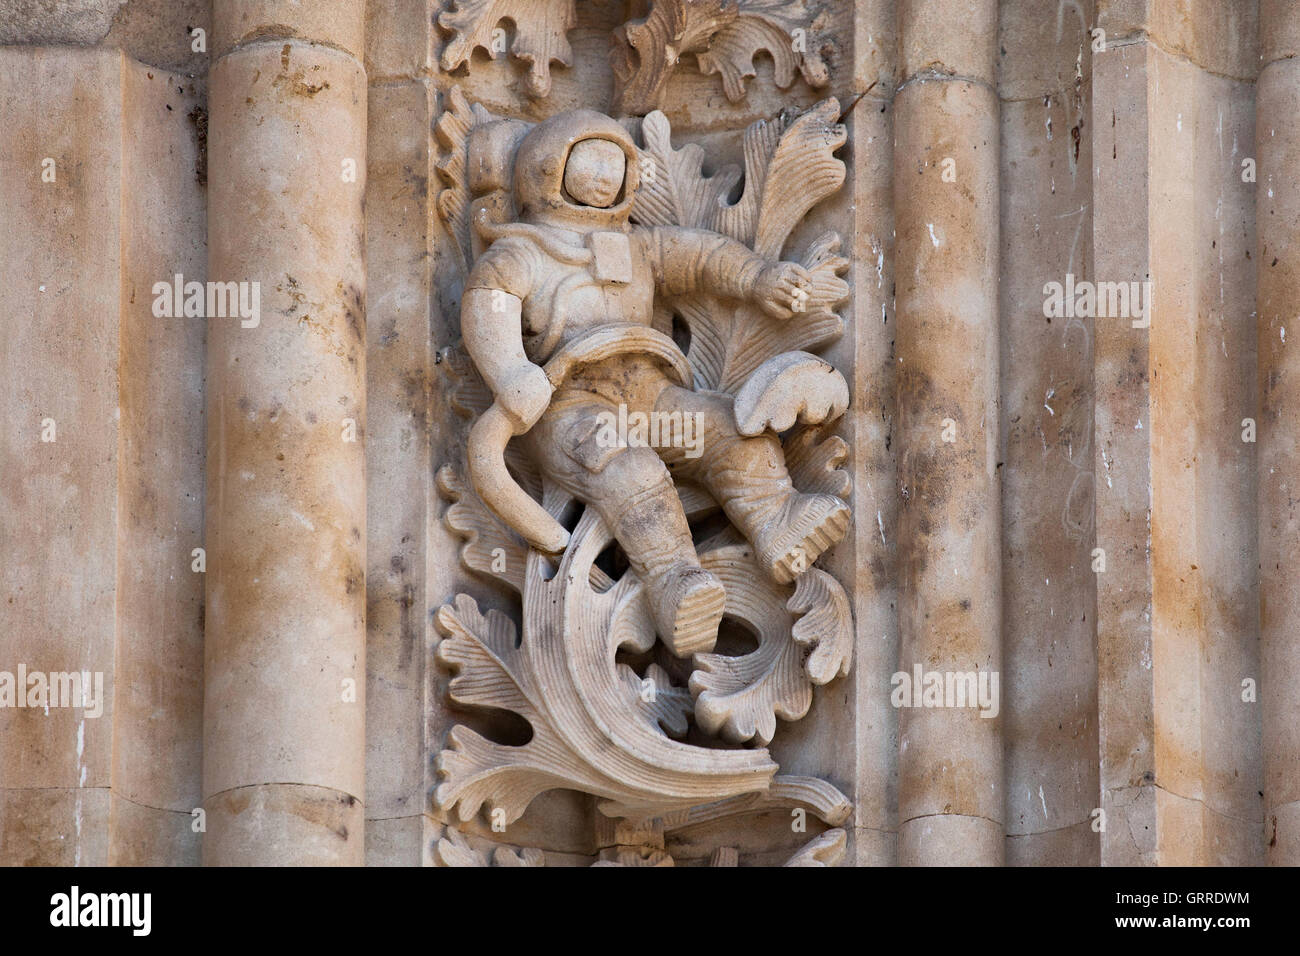 The famous astronaut carved in stone in the Salamanca Cathedral Facade. The sculpture was added during renovations in 1992. Stock Photo